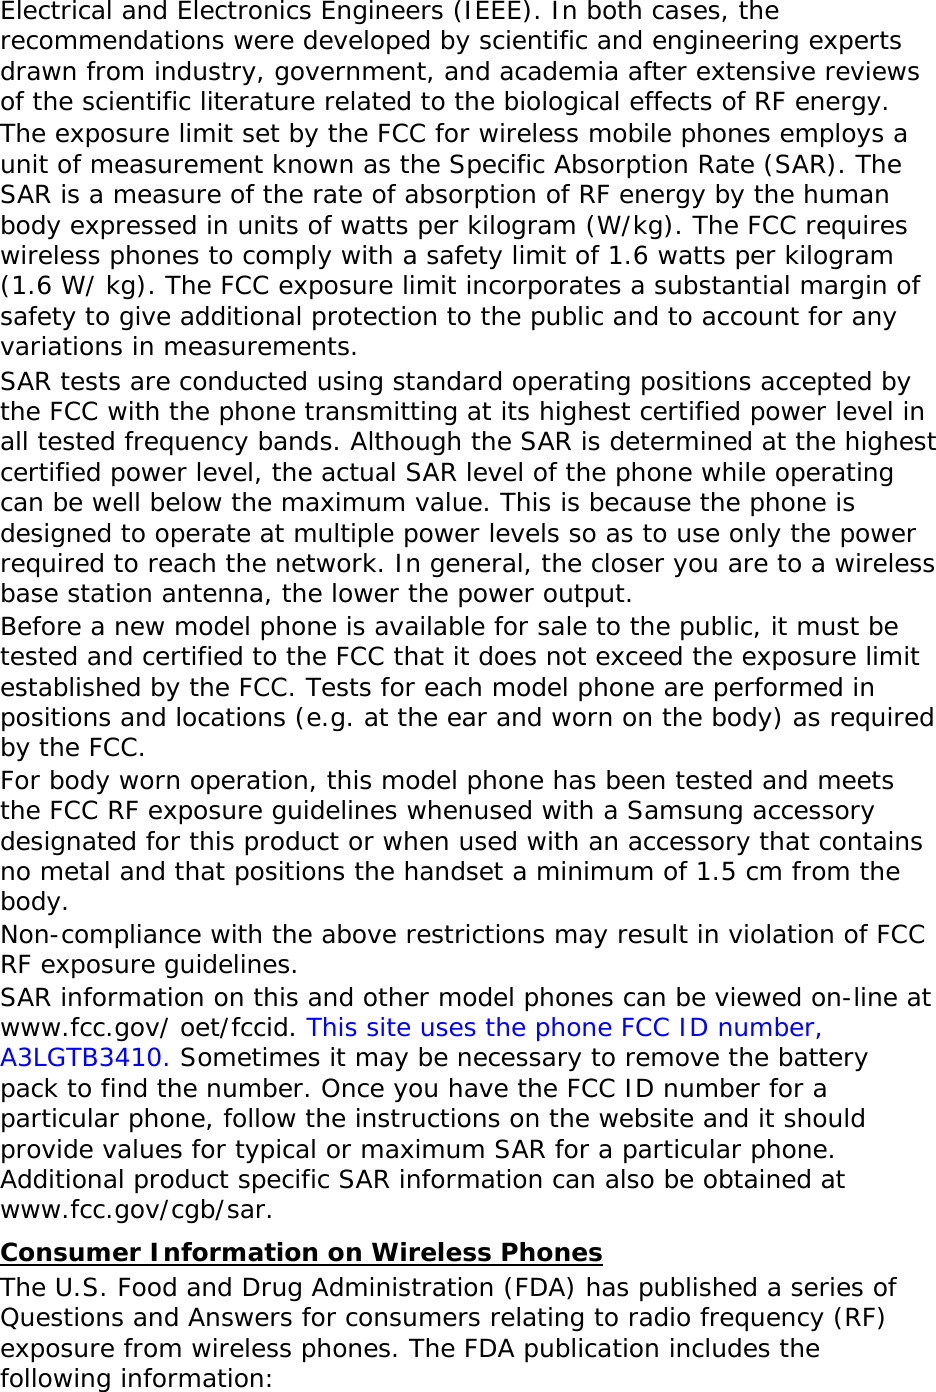 Electrical and Electronics Engineers (IEEE). In both cases, the recommendations were developed by scientific and engineering experts drawn from industry, government, and academia after extensive reviews of the scientific literature related to the biological effects of RF energy. The exposure limit set by the FCC for wireless mobile phones employs a unit of measurement known as the Specific Absorption Rate (SAR). The SAR is a measure of the rate of absorption of RF energy by the human body expressed in units of watts per kilogram (W/kg). The FCC requires wireless phones to comply with a safety limit of 1.6 watts per kilogram (1.6 W/ kg). The FCC exposure limit incorporates a substantial margin of safety to give additional protection to the public and to account for any variations in measurements. SAR tests are conducted using standard operating positions accepted by the FCC with the phone transmitting at its highest certified power level in all tested frequency bands. Although the SAR is determined at the highest certified power level, the actual SAR level of the phone while operating can be well below the maximum value. This is because the phone is designed to operate at multiple power levels so as to use only the power required to reach the network. In general, the closer you are to a wireless base station antenna, the lower the power output. Before a new model phone is available for sale to the public, it must be tested and certified to the FCC that it does not exceed the exposure limit established by the FCC. Tests for each model phone are performed in positions and locations (e.g. at the ear and worn on the body) as required by the FCC.   For body worn operation, this model phone has been tested and meets the FCC RF exposure guidelines whenused with a Samsung accessory designated for this product or when used with an accessory that contains no metal and that positions the handset a minimum of 1.5 cm from the body.  Non-compliance with the above restrictions may result in violation of FCC RF exposure guidelines. SAR information on this and other model phones can be viewed on-line at www.fcc.gov/ oet/fccid. This site uses the phone FCC ID number, A3LGTB3410. Sometimes it may be necessary to remove the battery pack to find the number. Once you have the FCC ID number for a particular phone, follow the instructions on the website and it should provide values for typical or maximum SAR for a particular phone. Additional product specific SAR information can also be obtained at www.fcc.gov/cgb/sar. Consumer Information on Wireless Phones The U.S. Food and Drug Administration (FDA) has published a series of Questions and Answers for consumers relating to radio frequency (RF) exposure from wireless phones. The FDA publication includes the following information: 